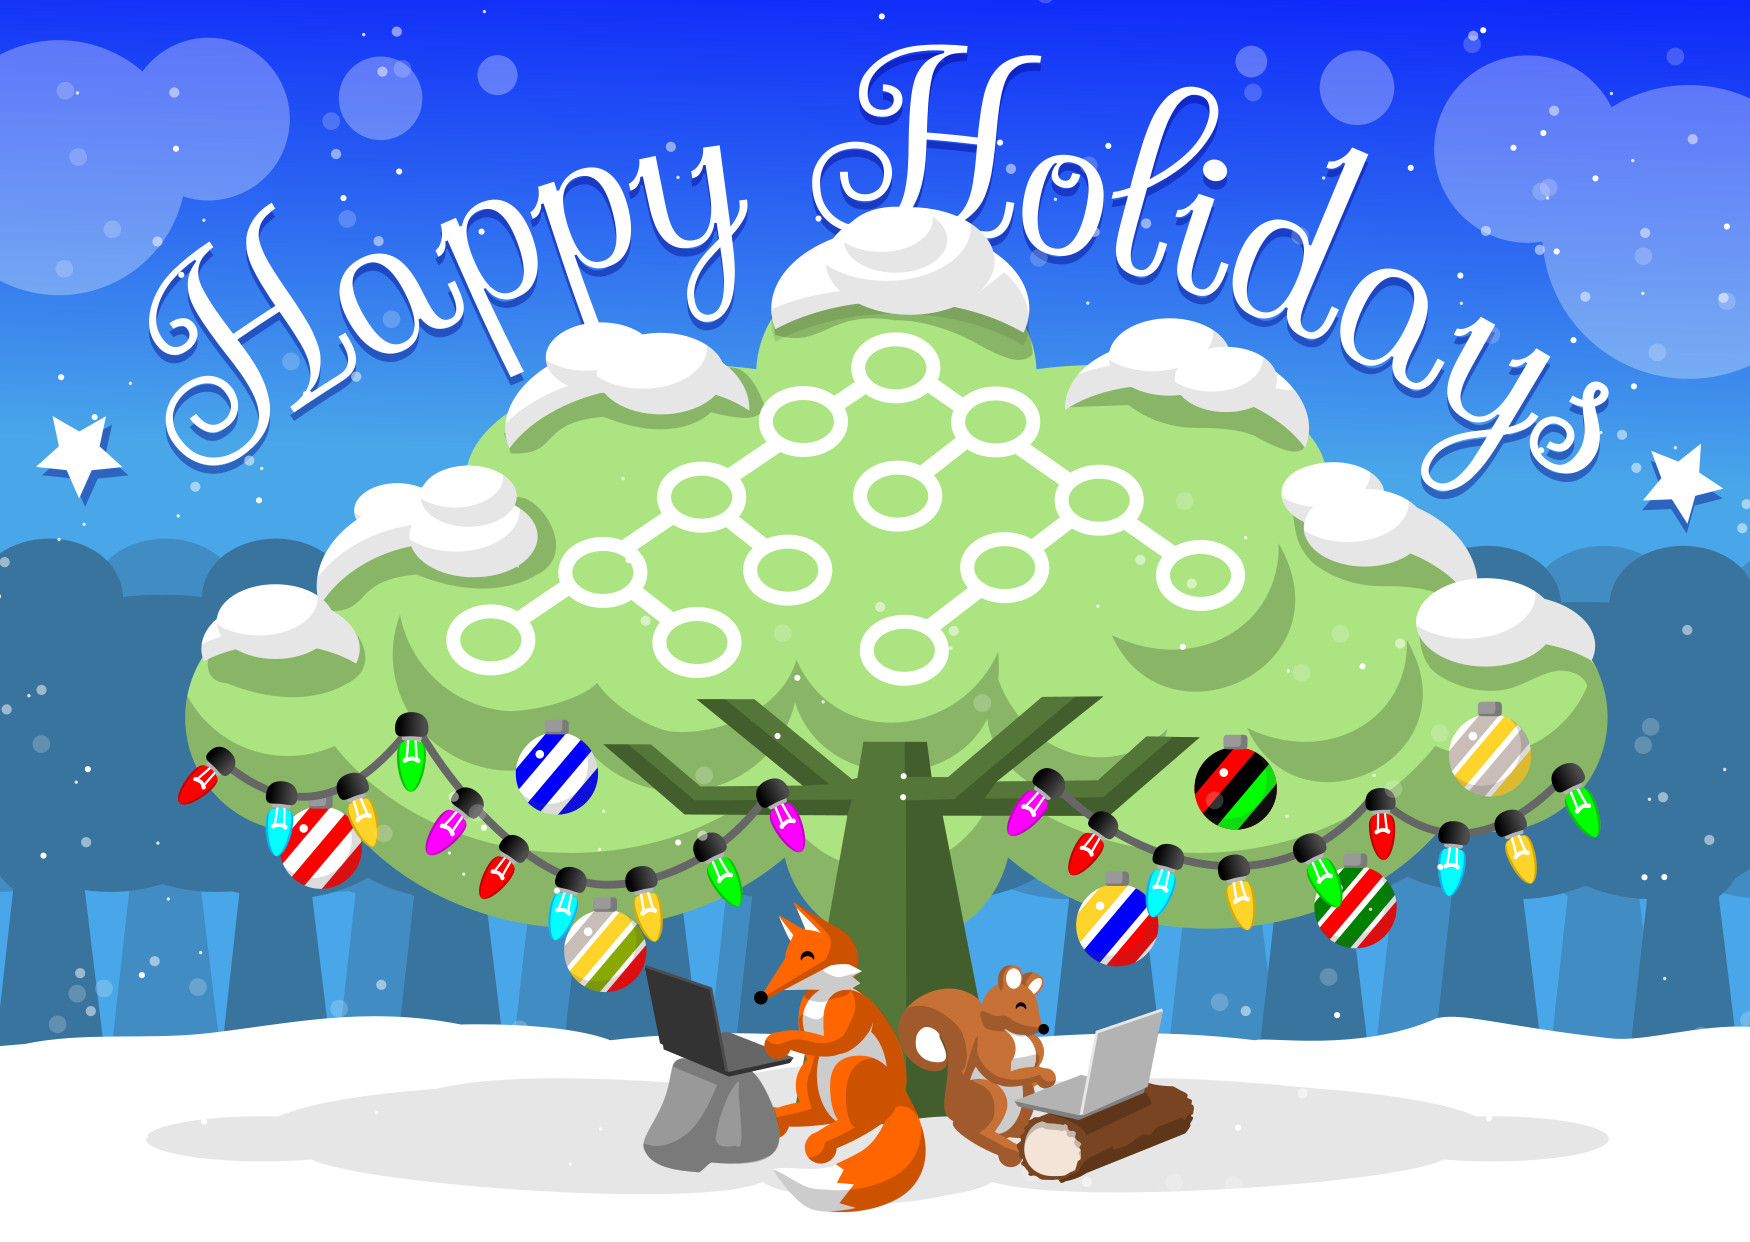 Happy Holidays from Software Freedom Conservancy!